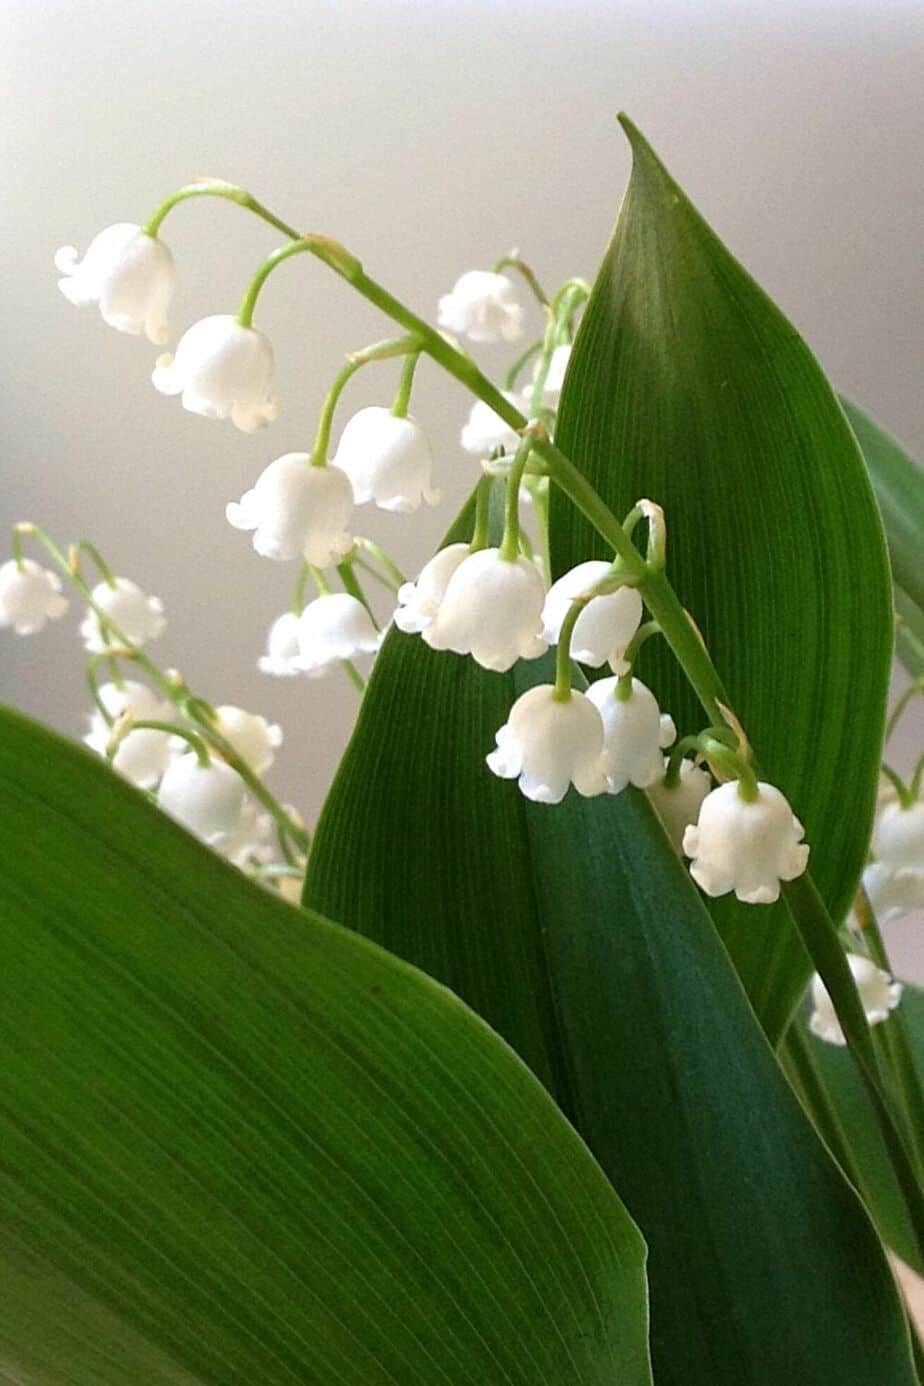 The Lily of the Valley's cluster of white blooms is a perfect addition to your northeast-facing garden